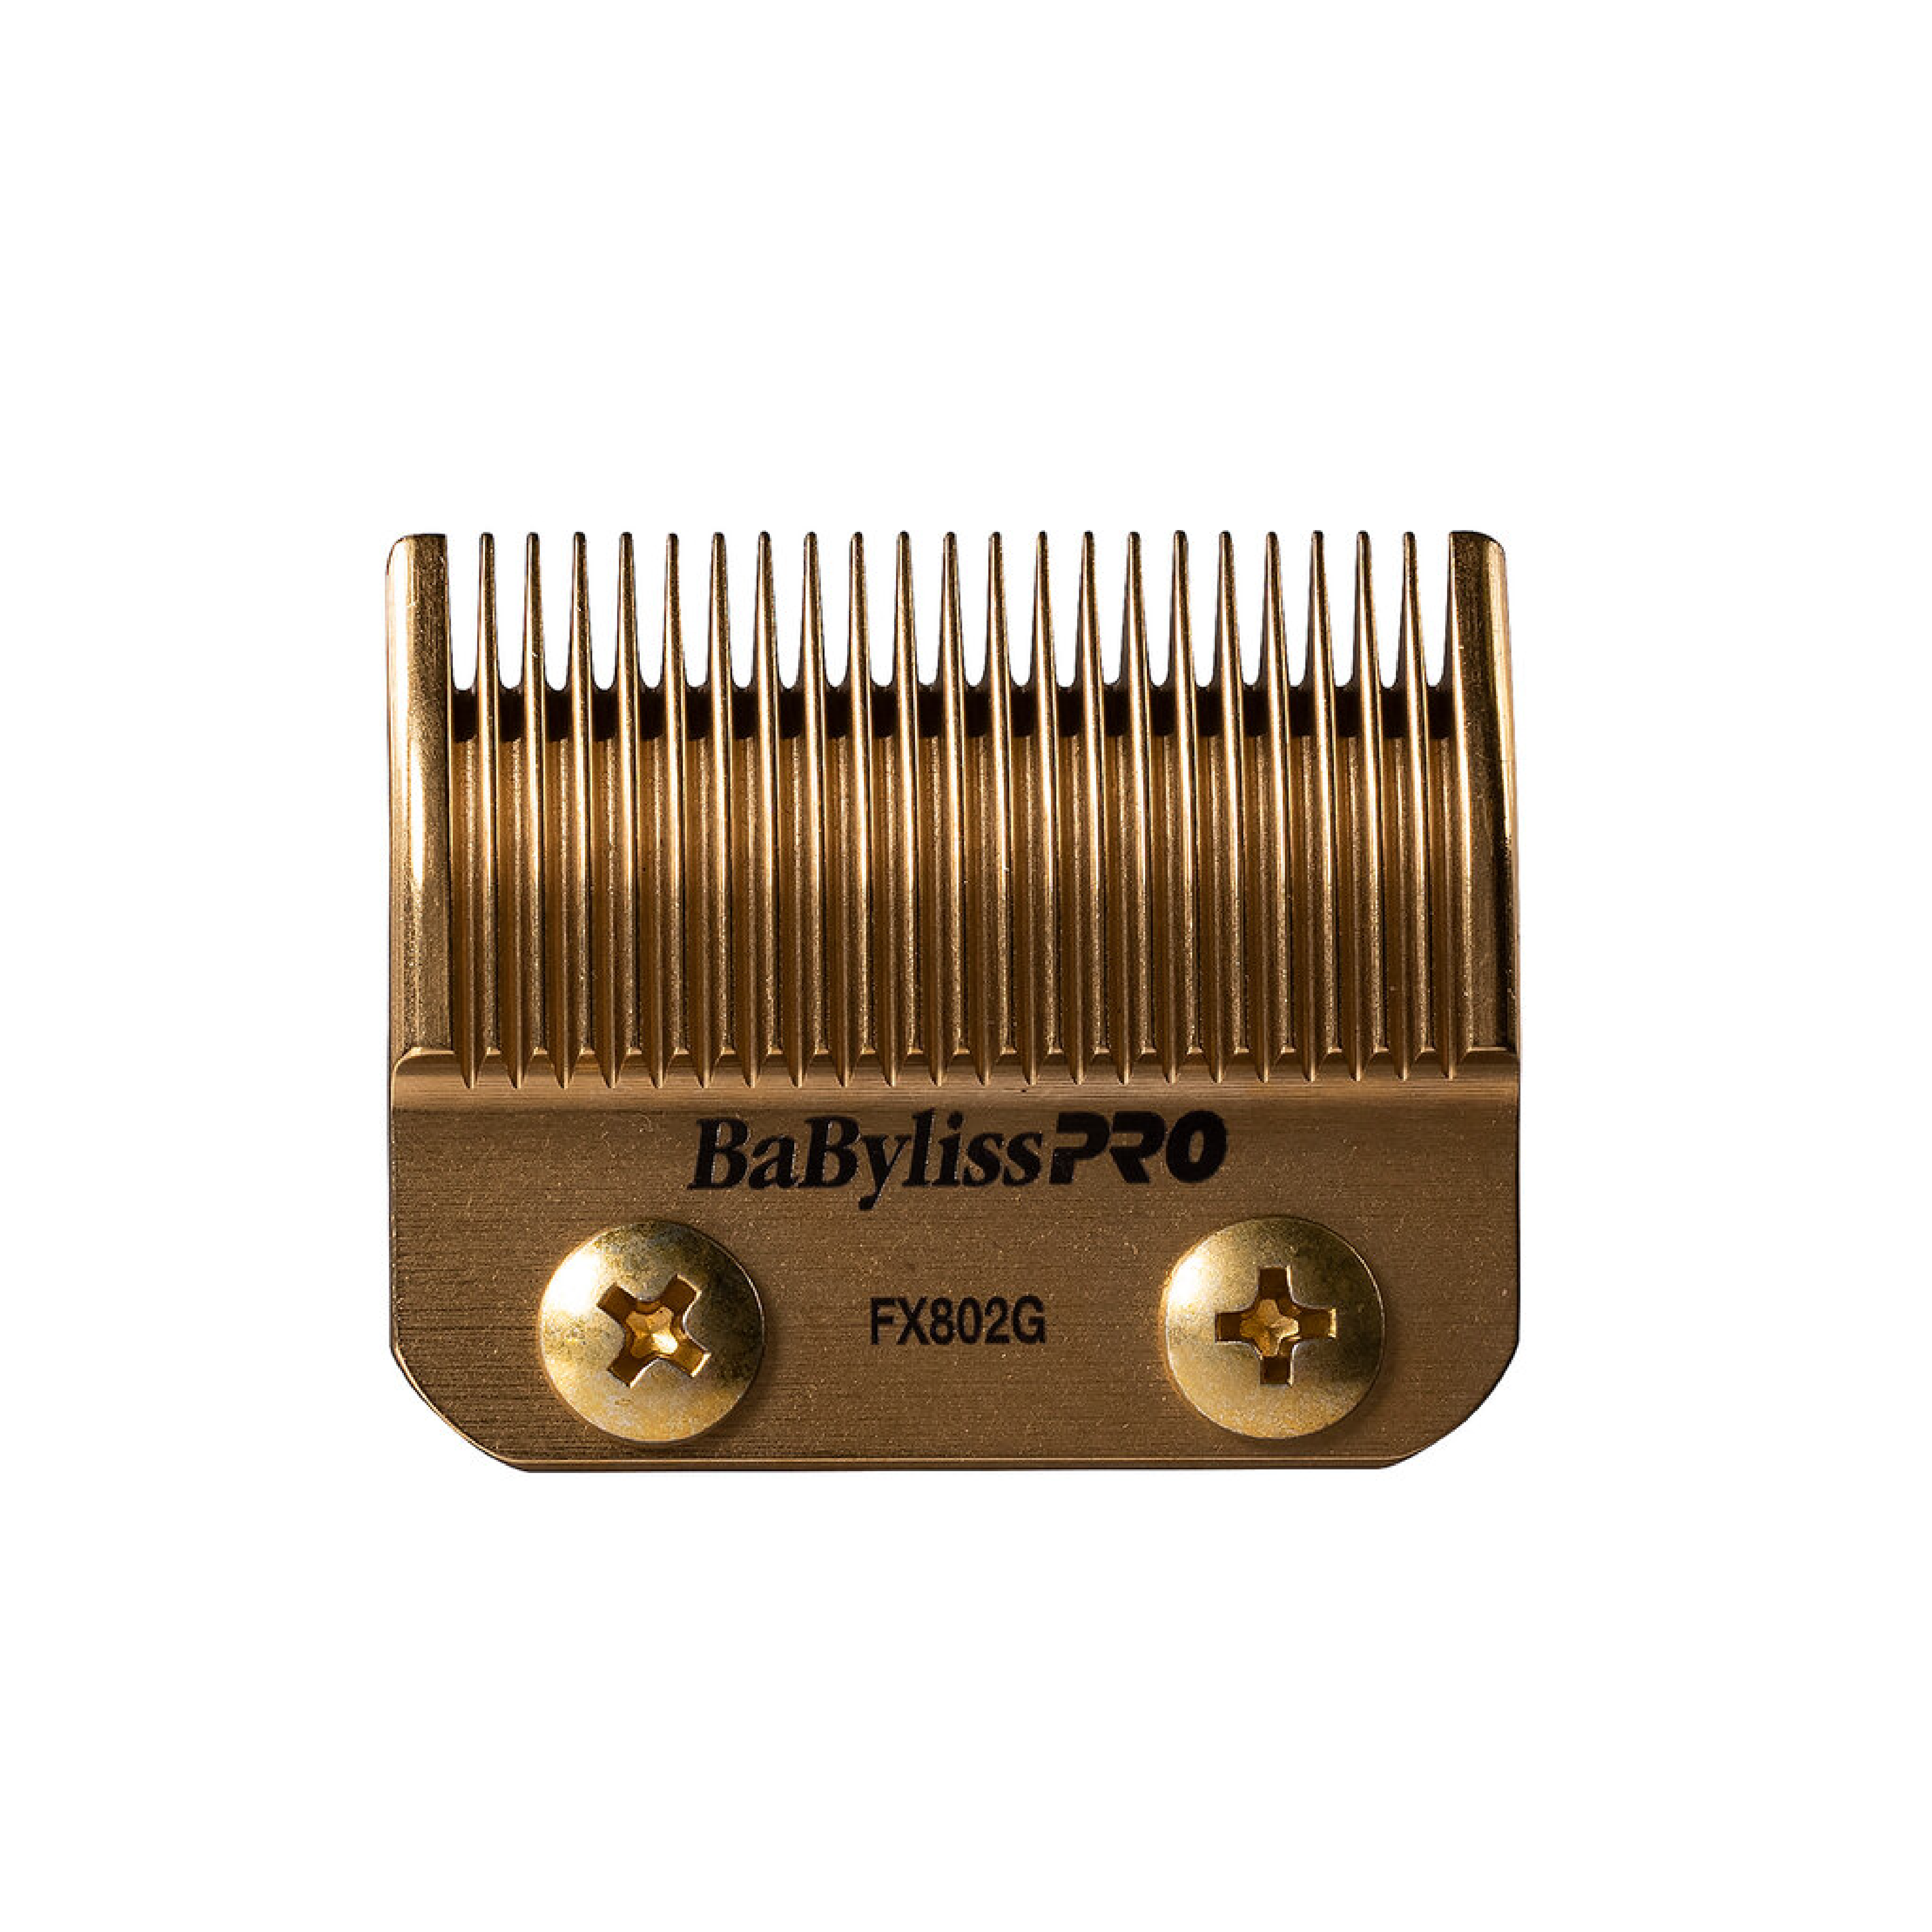 Babyliss Pro DLC And Titanium Coated Gold Replacement Clipper Blade - FX802G